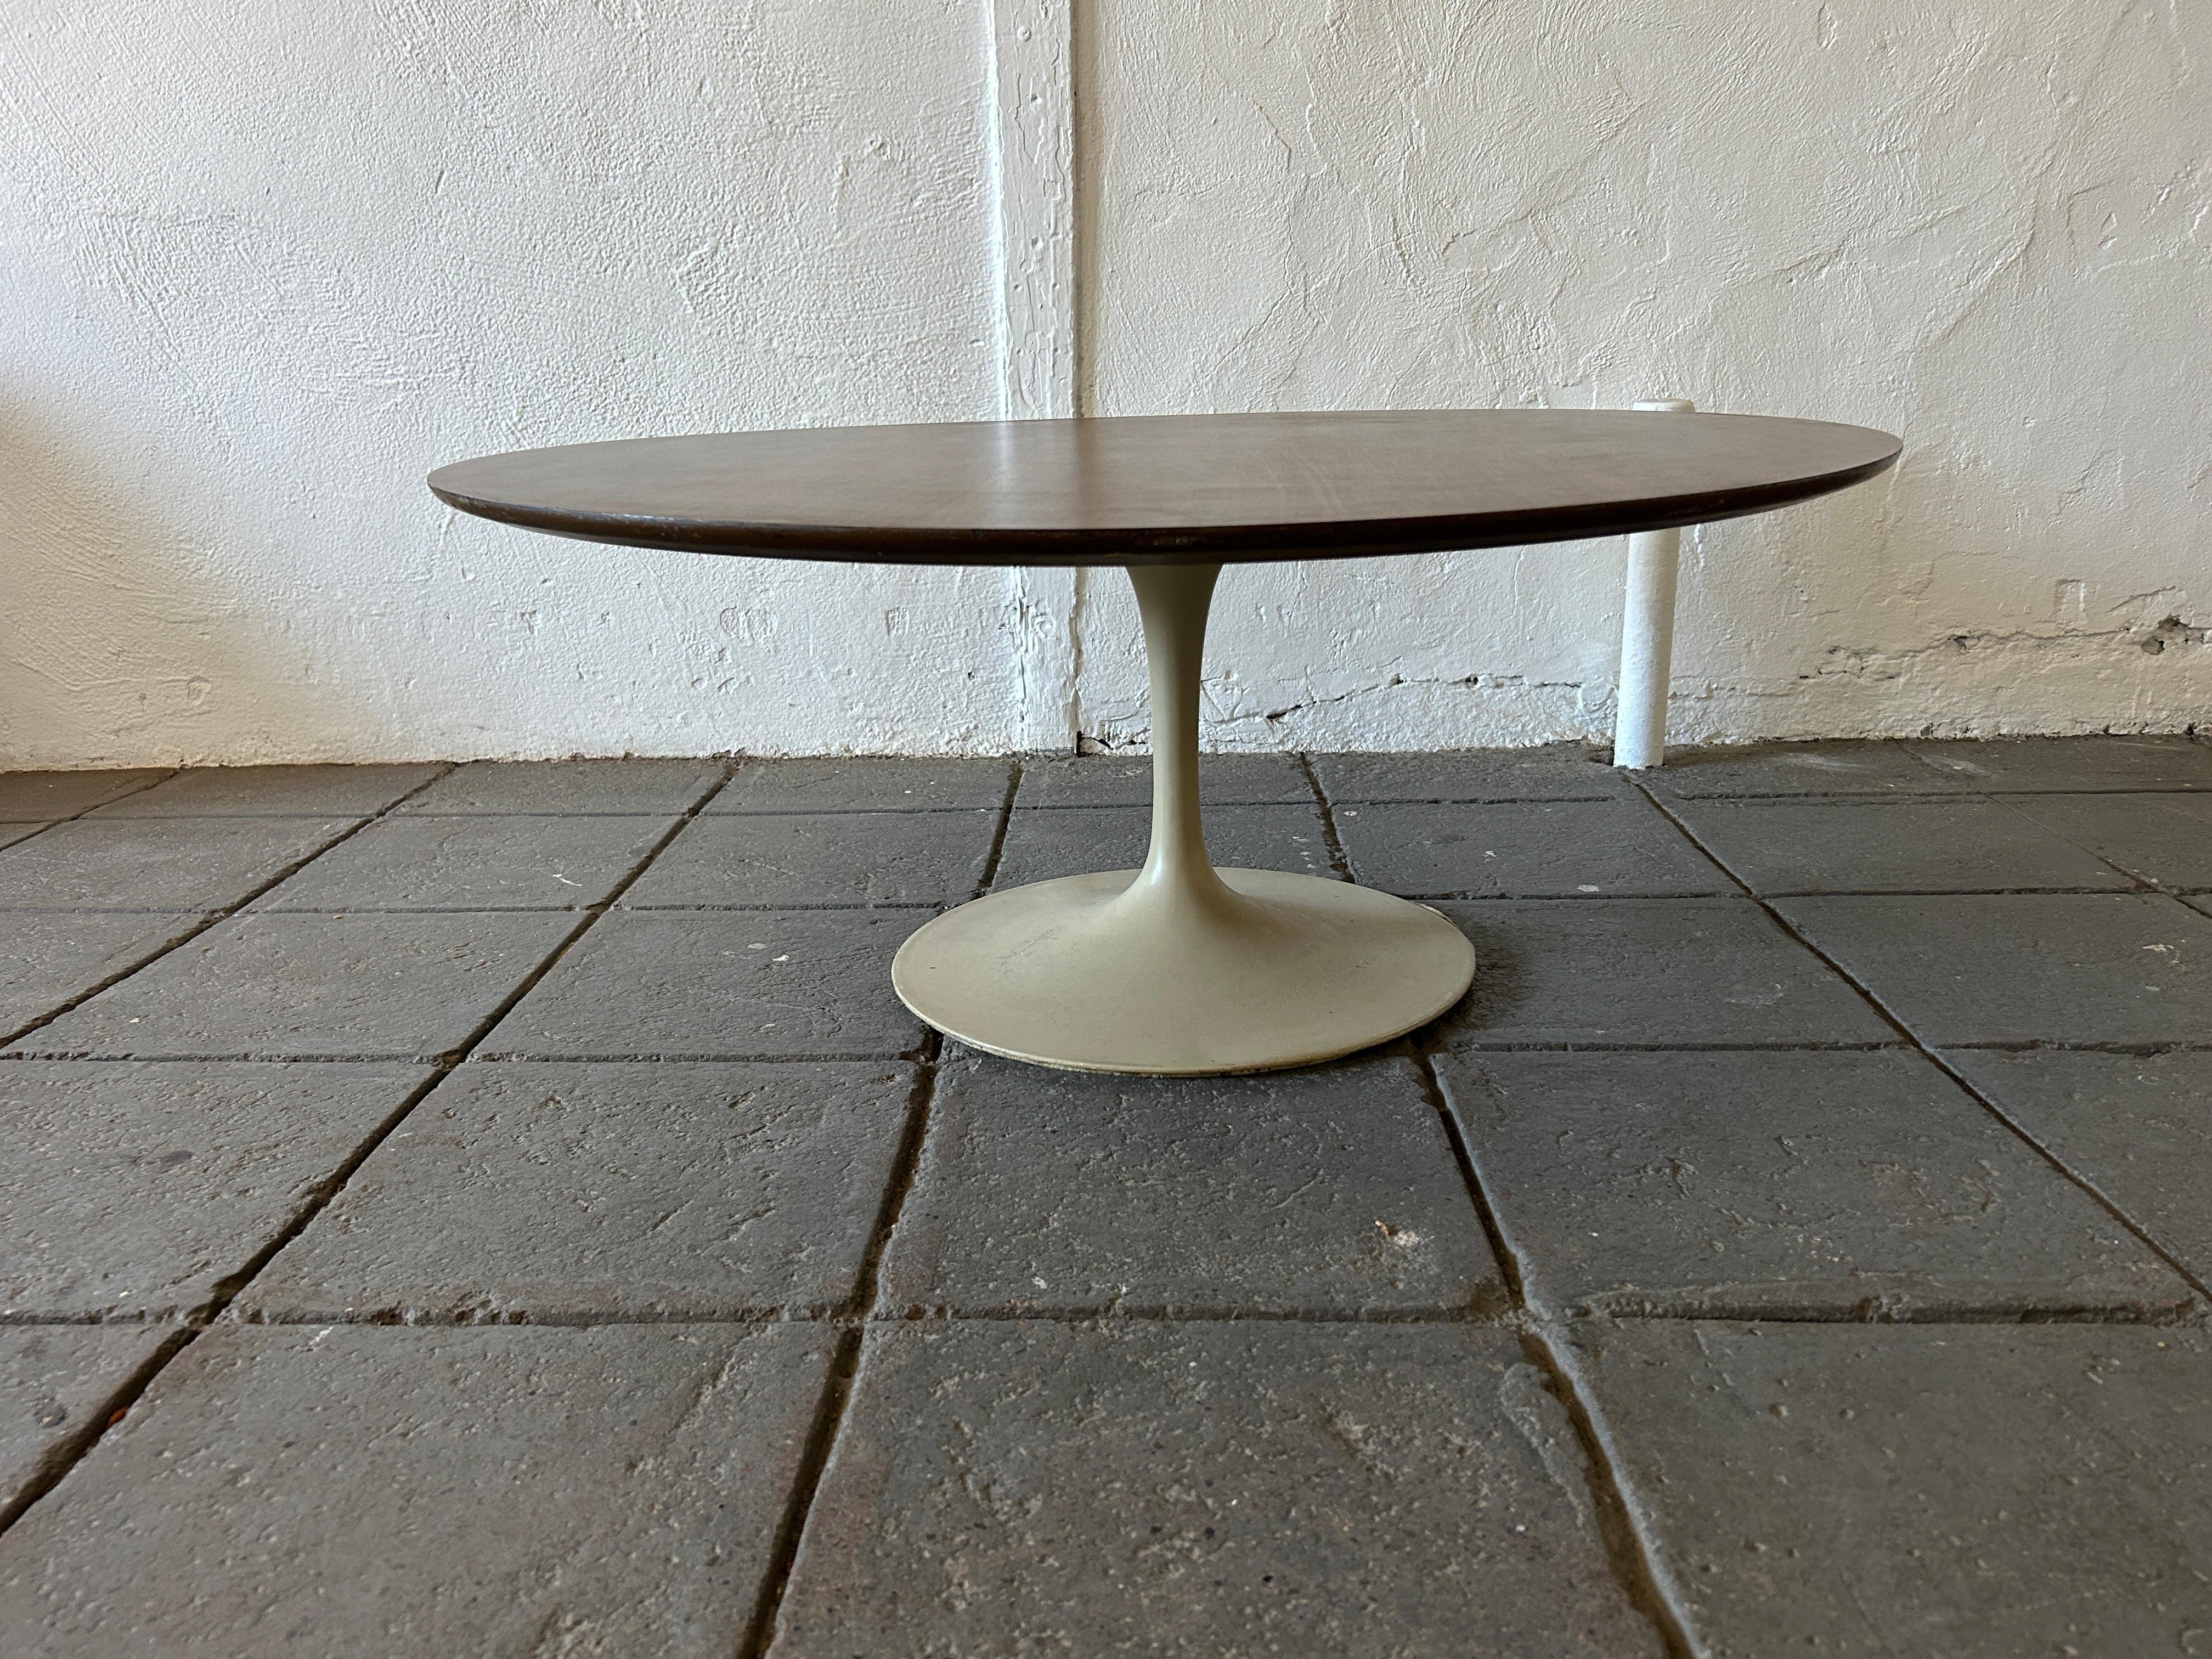 Mid-Century Modern knoll 3’ round tulip coffee table walnut Laminate top. Base is heavy and has has original off white paint. Has original felt ring around base to protect the floor. No labels. Has tapered edge on table top. Designed by Eero